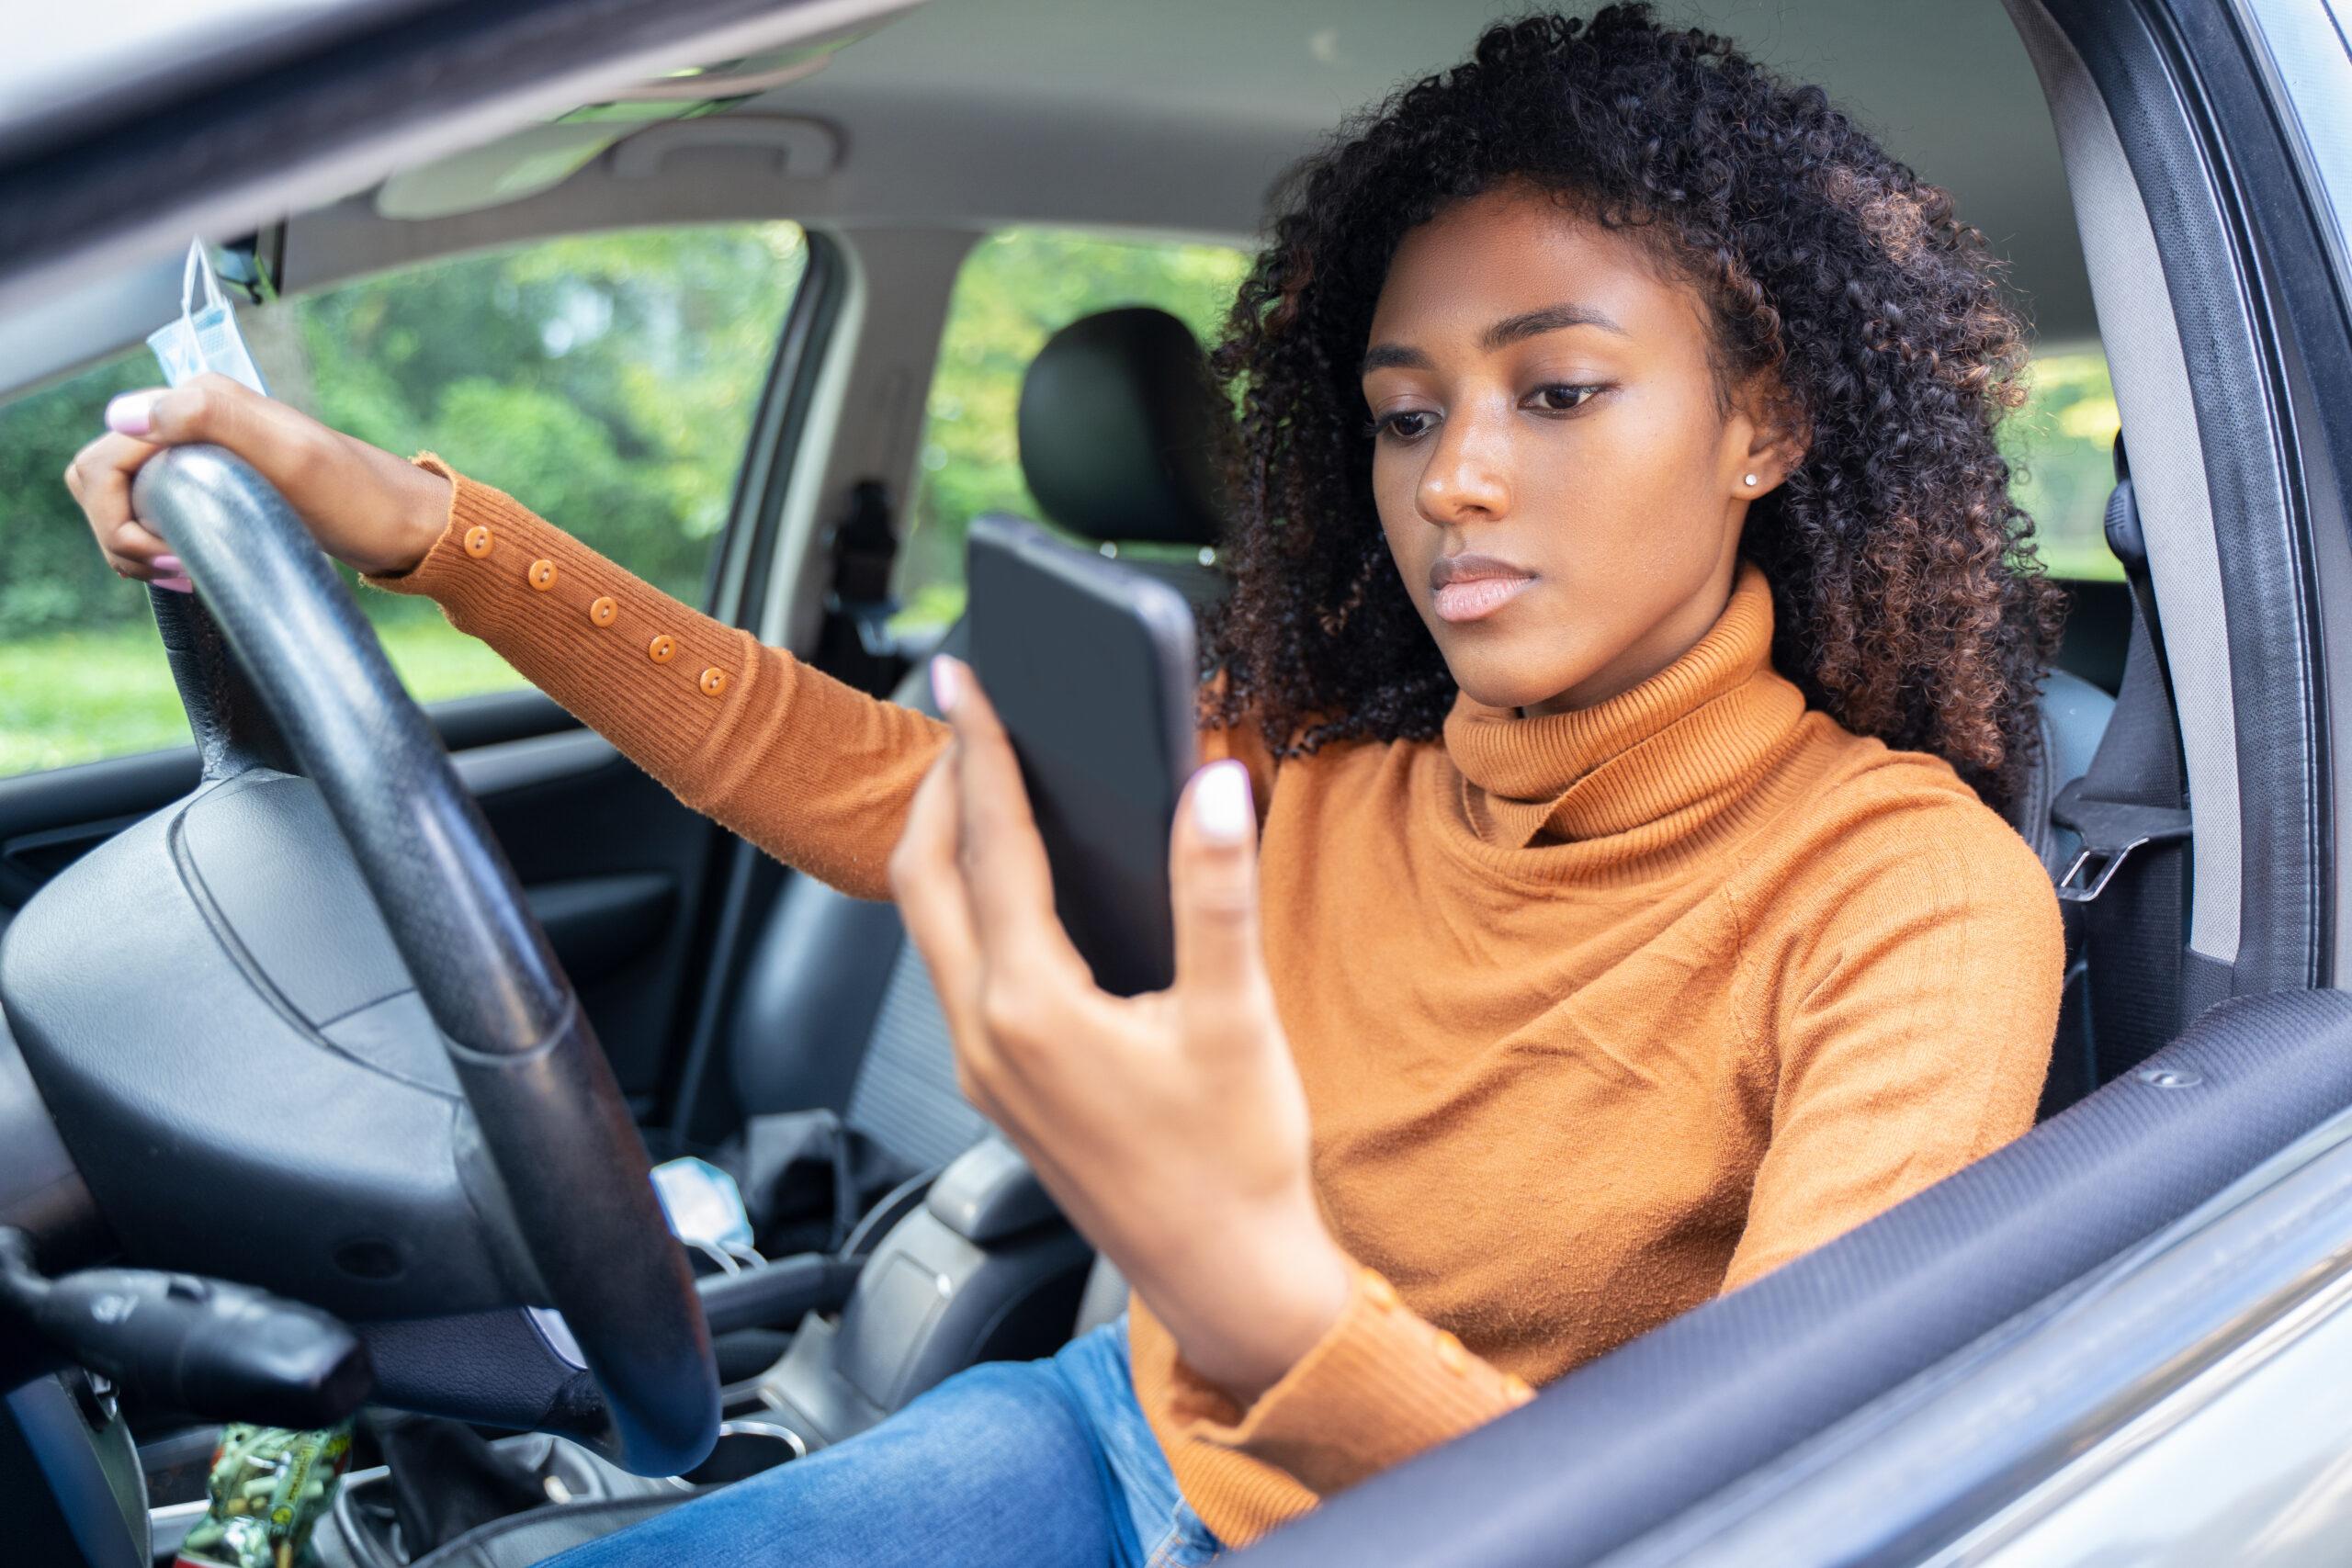 Woman driving car distracted by her mobile phone